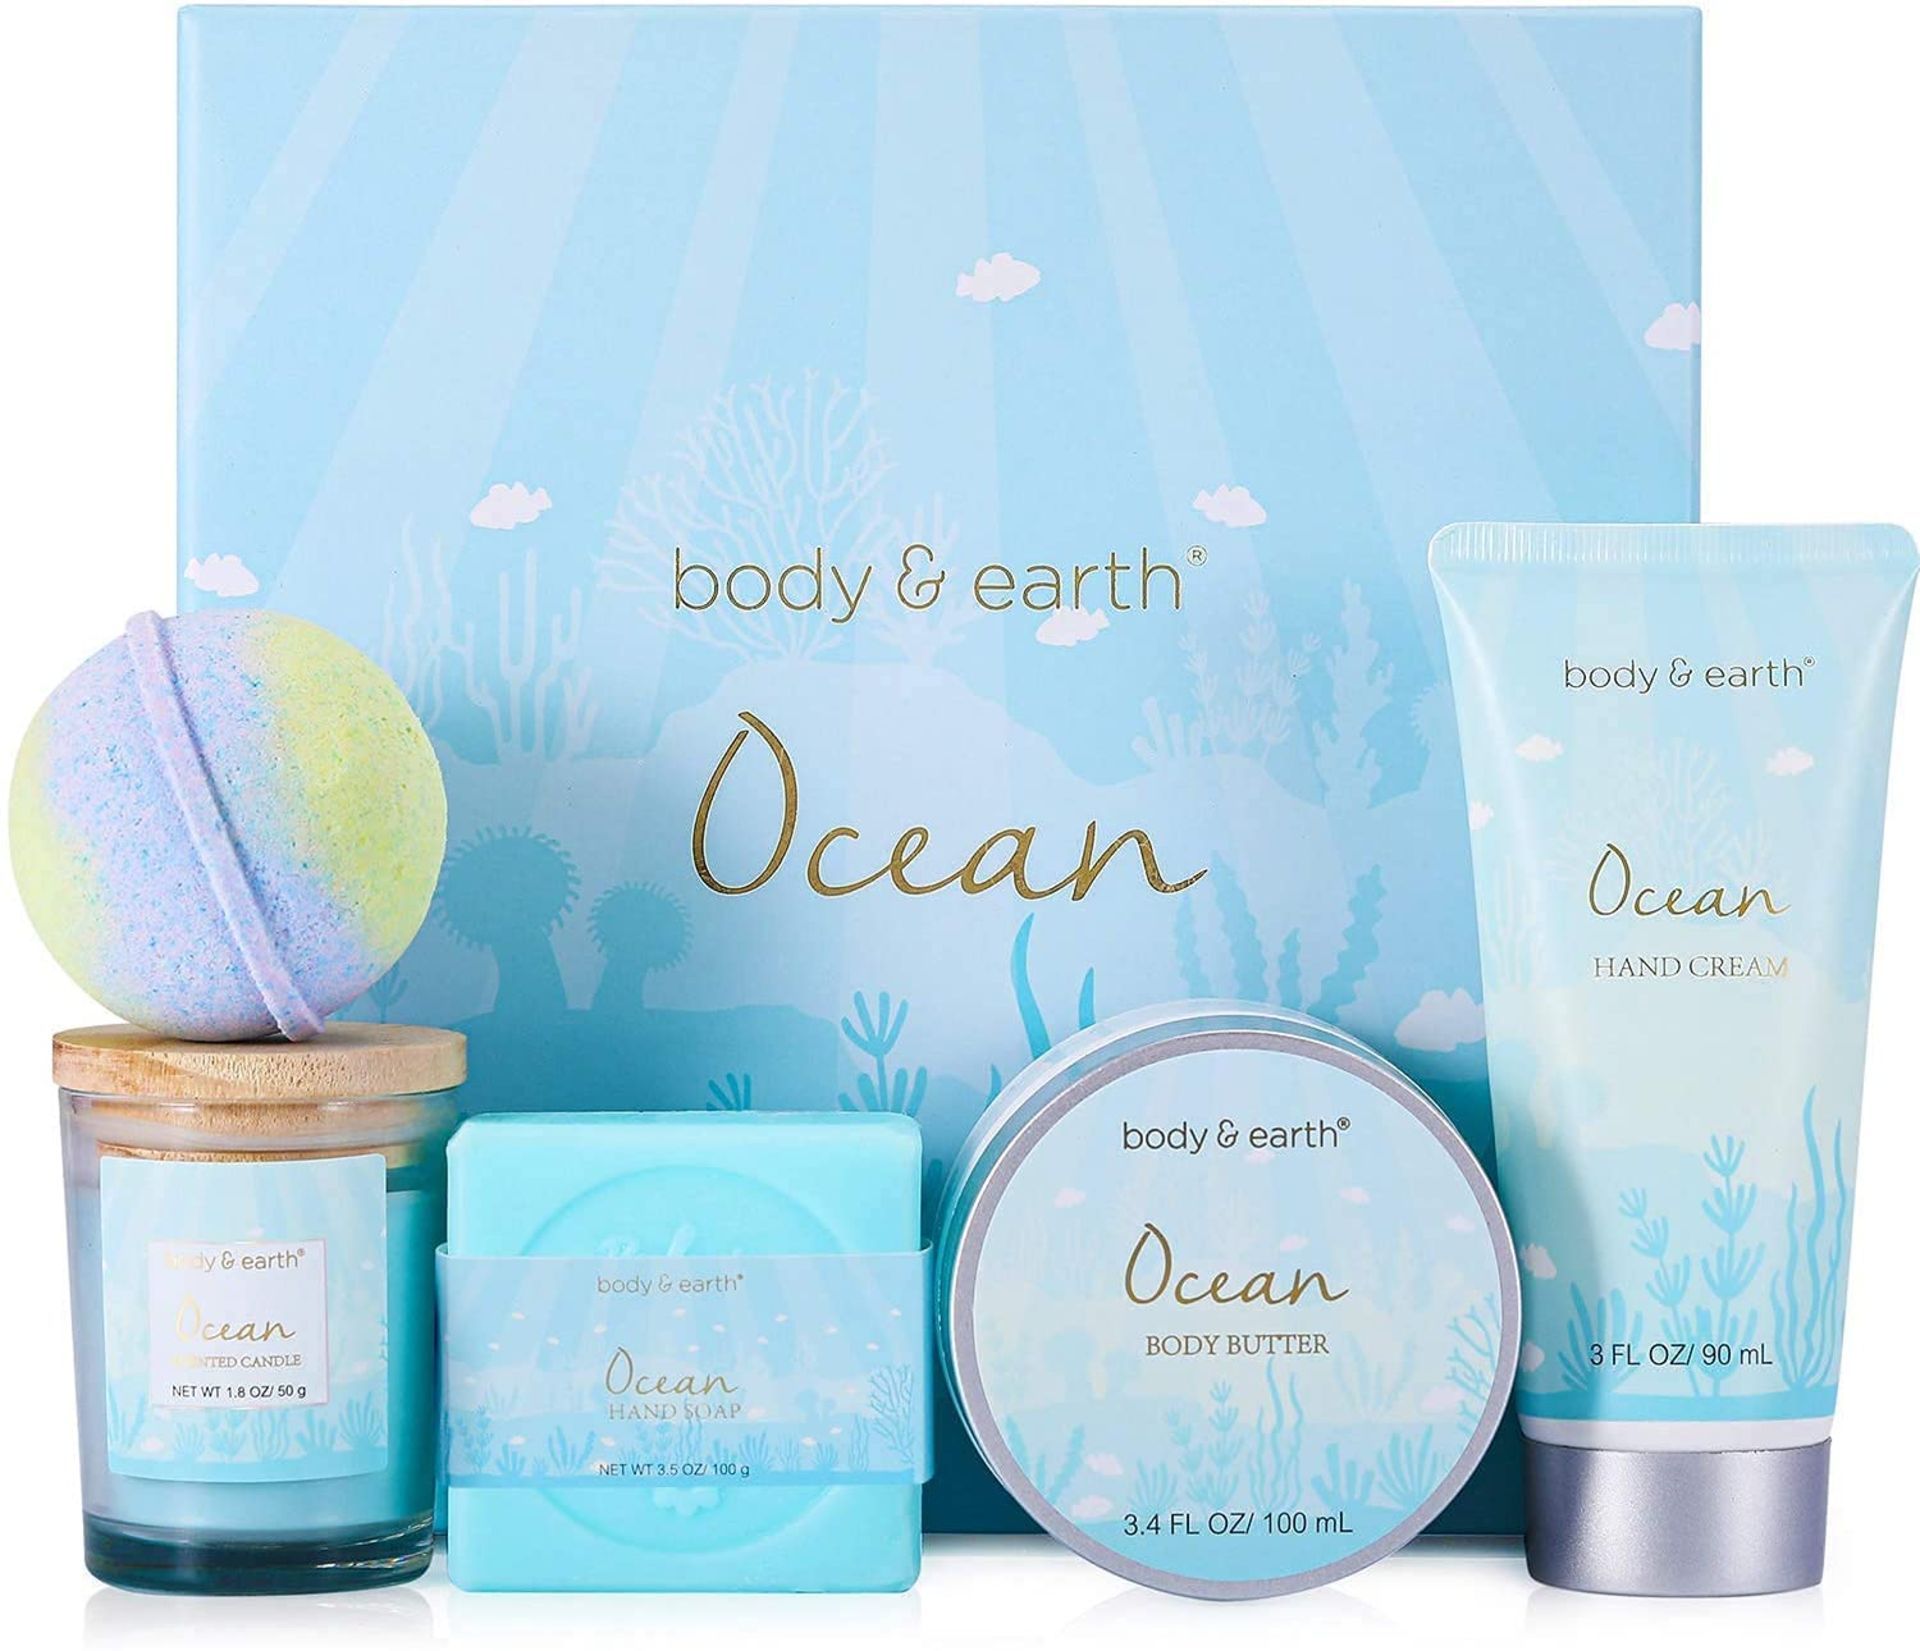 8 X NEW PACKAGED BODY & EARTH Gifts for Women- 5Pcs Ocean Gifts for her with Scented Candle, Body